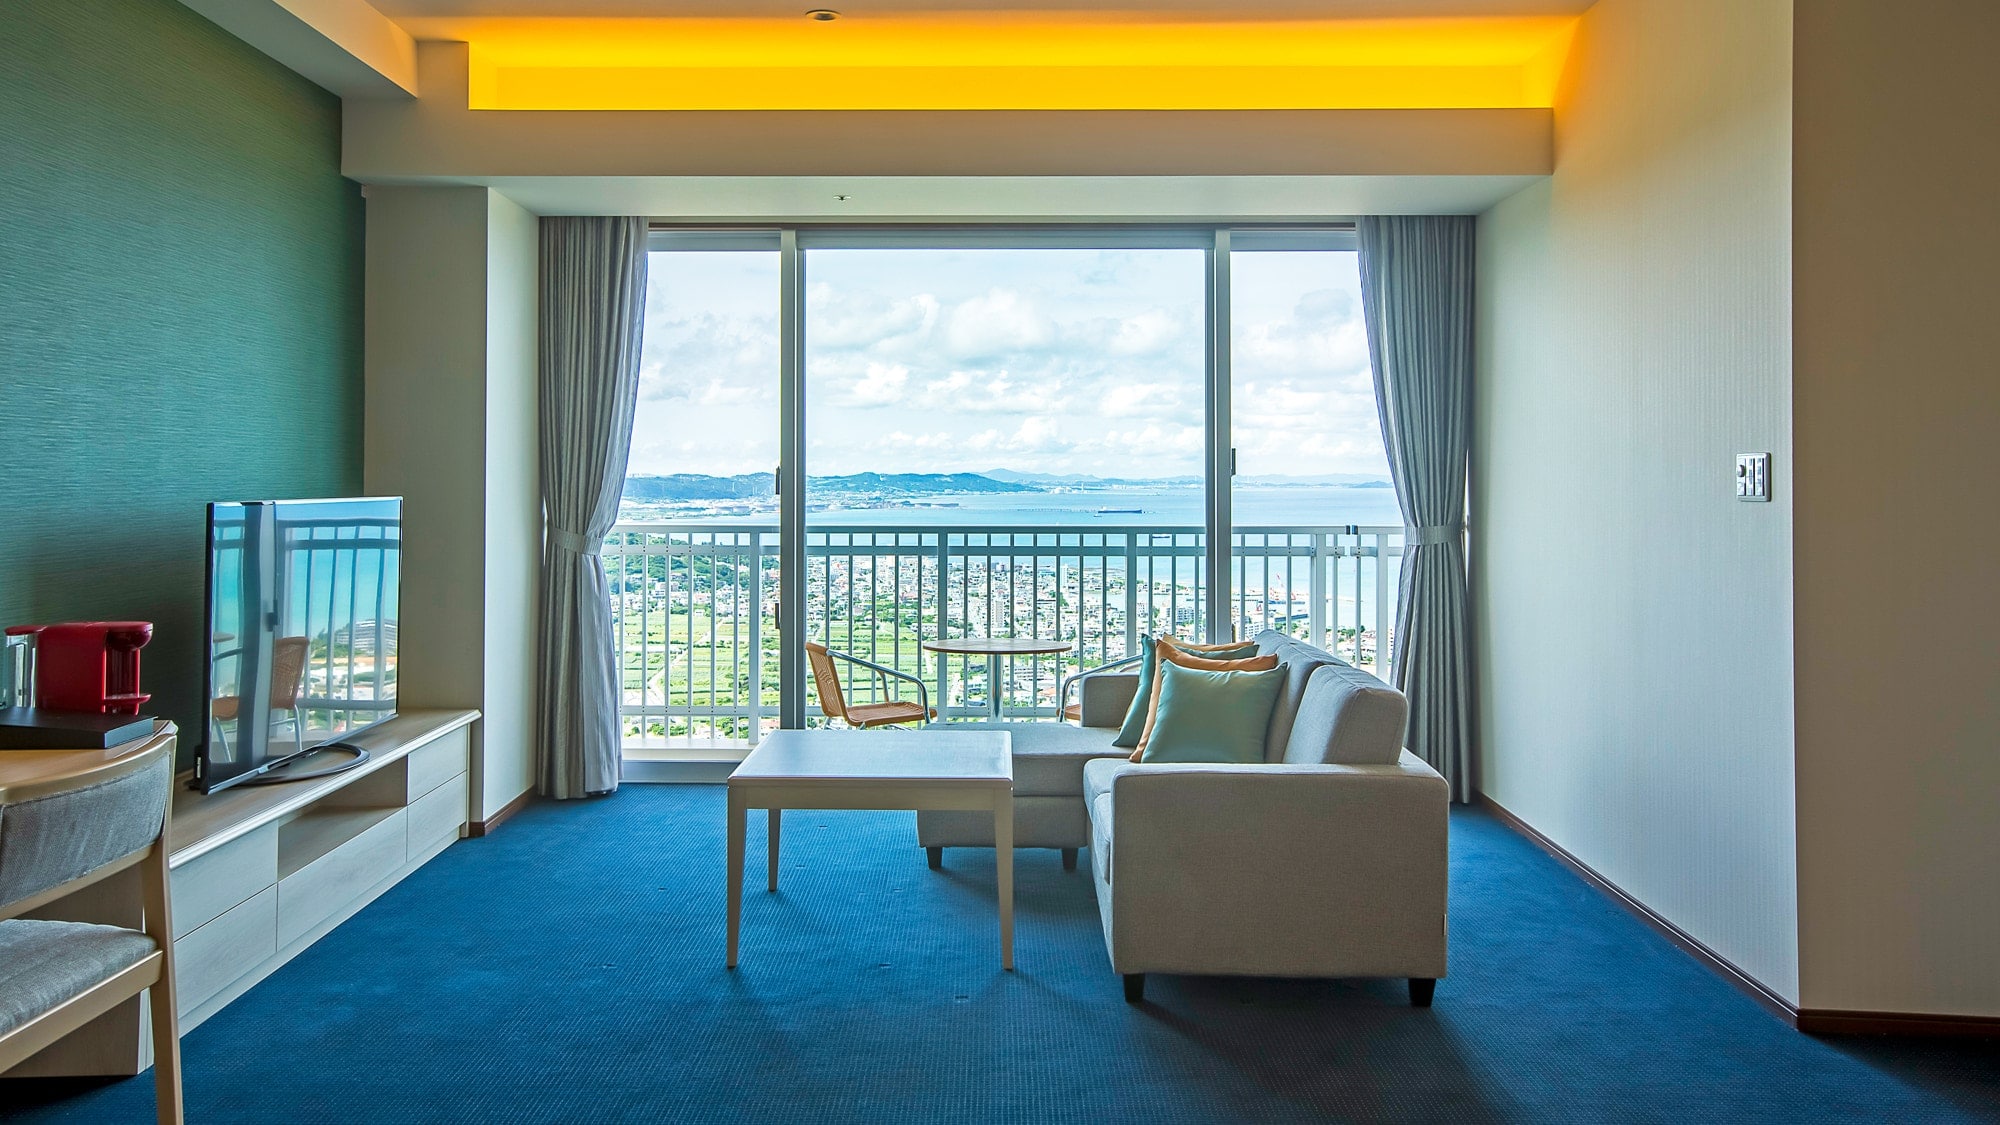 [Annex building] Suite / Guest room on the top floor where you can feel the Okinawan sky nearby